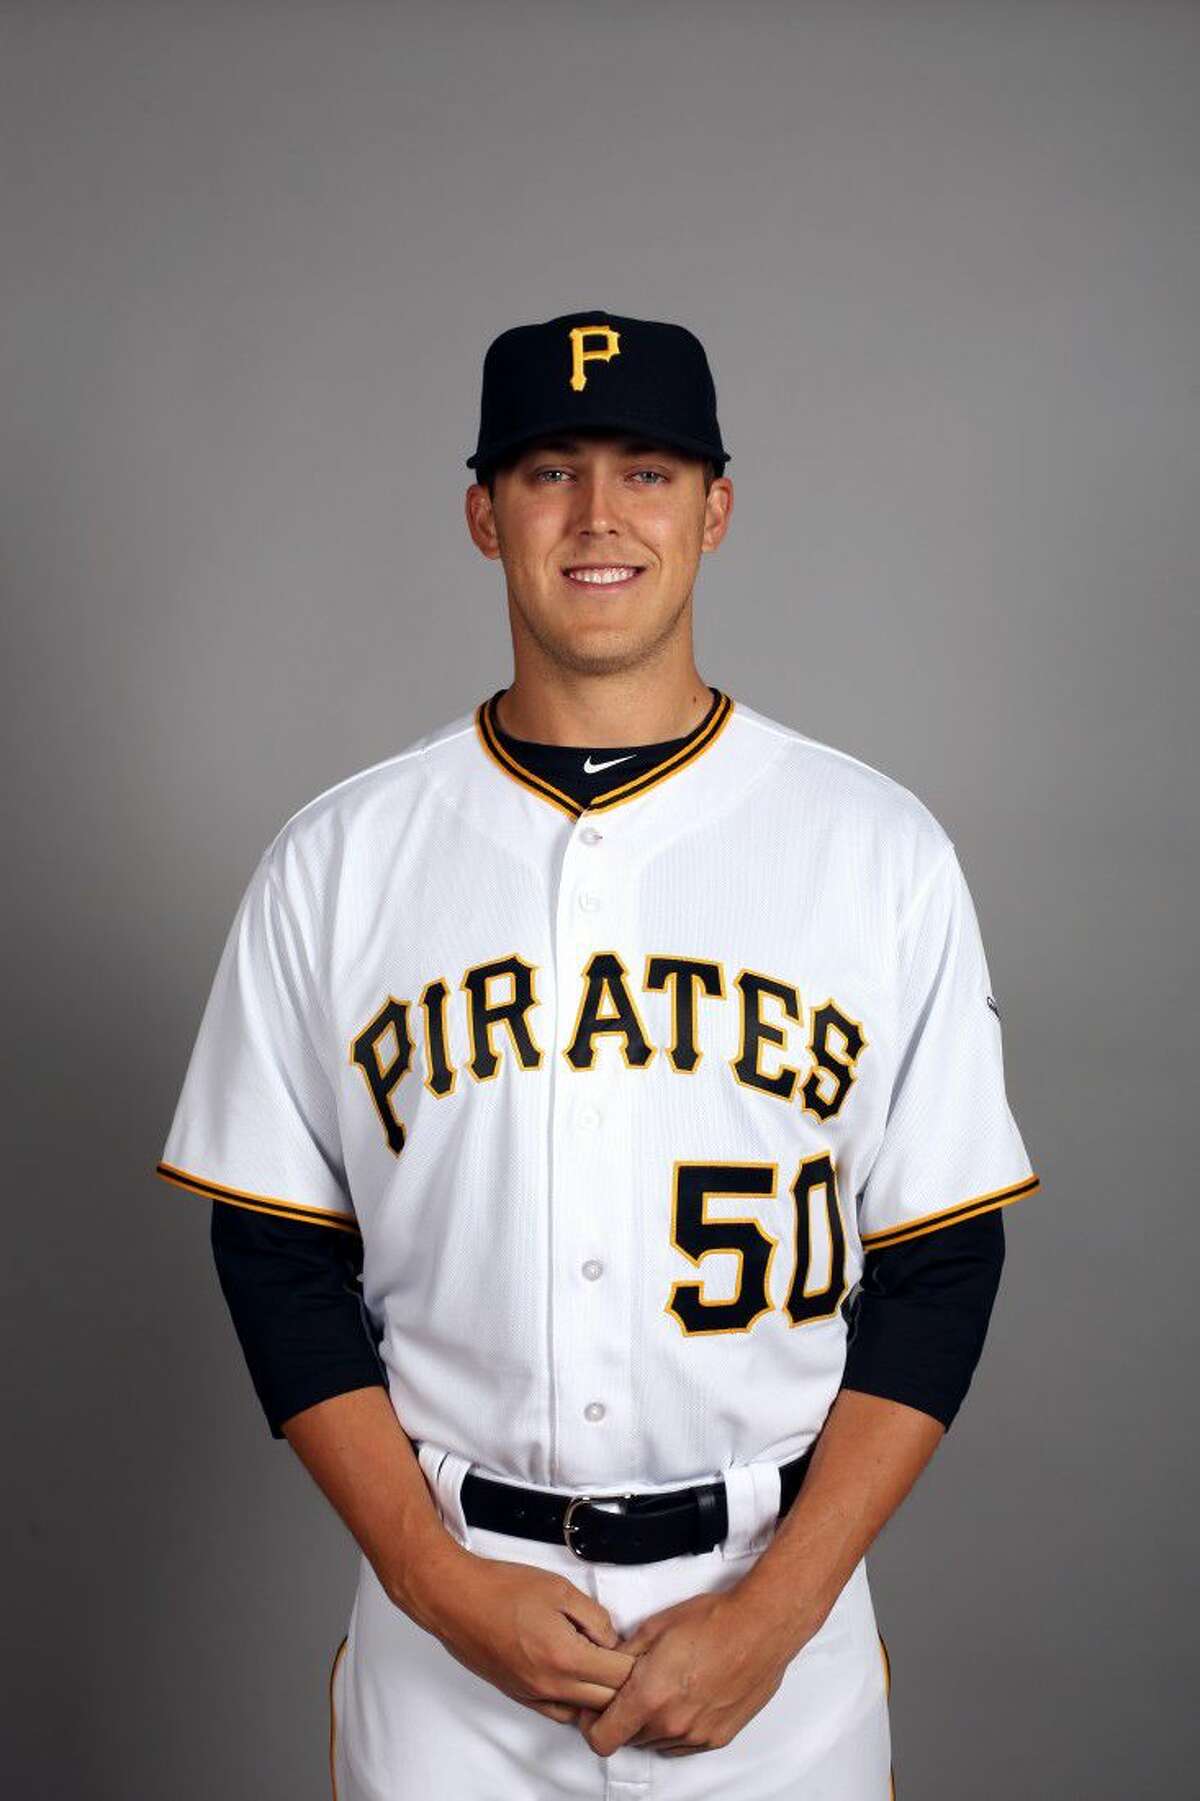 MLB: The Woodlands alum Taillon to make MLB debut Wednesday